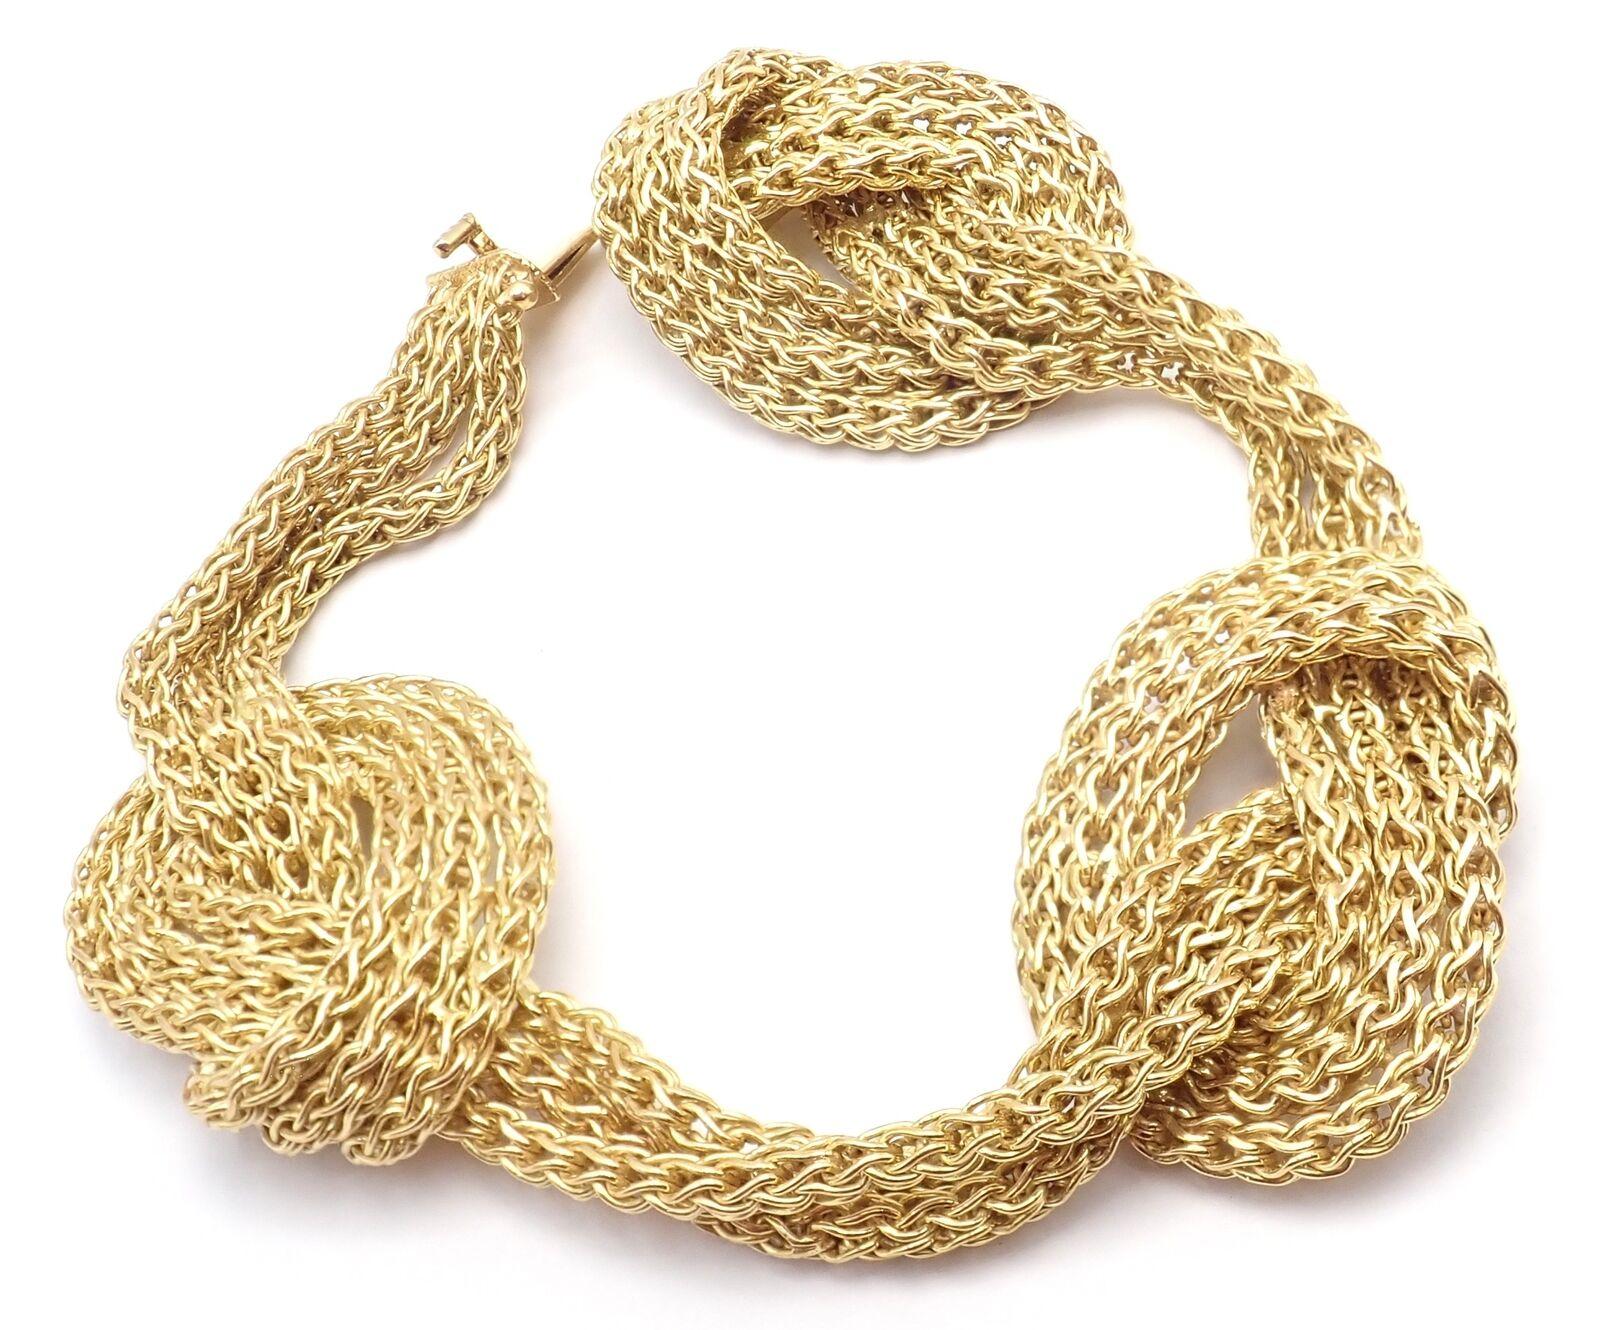 18k Yellow Gold Woven Knot Link Vintage Bracelet by Tiffany & Co.
Details: 
Length: 7.5